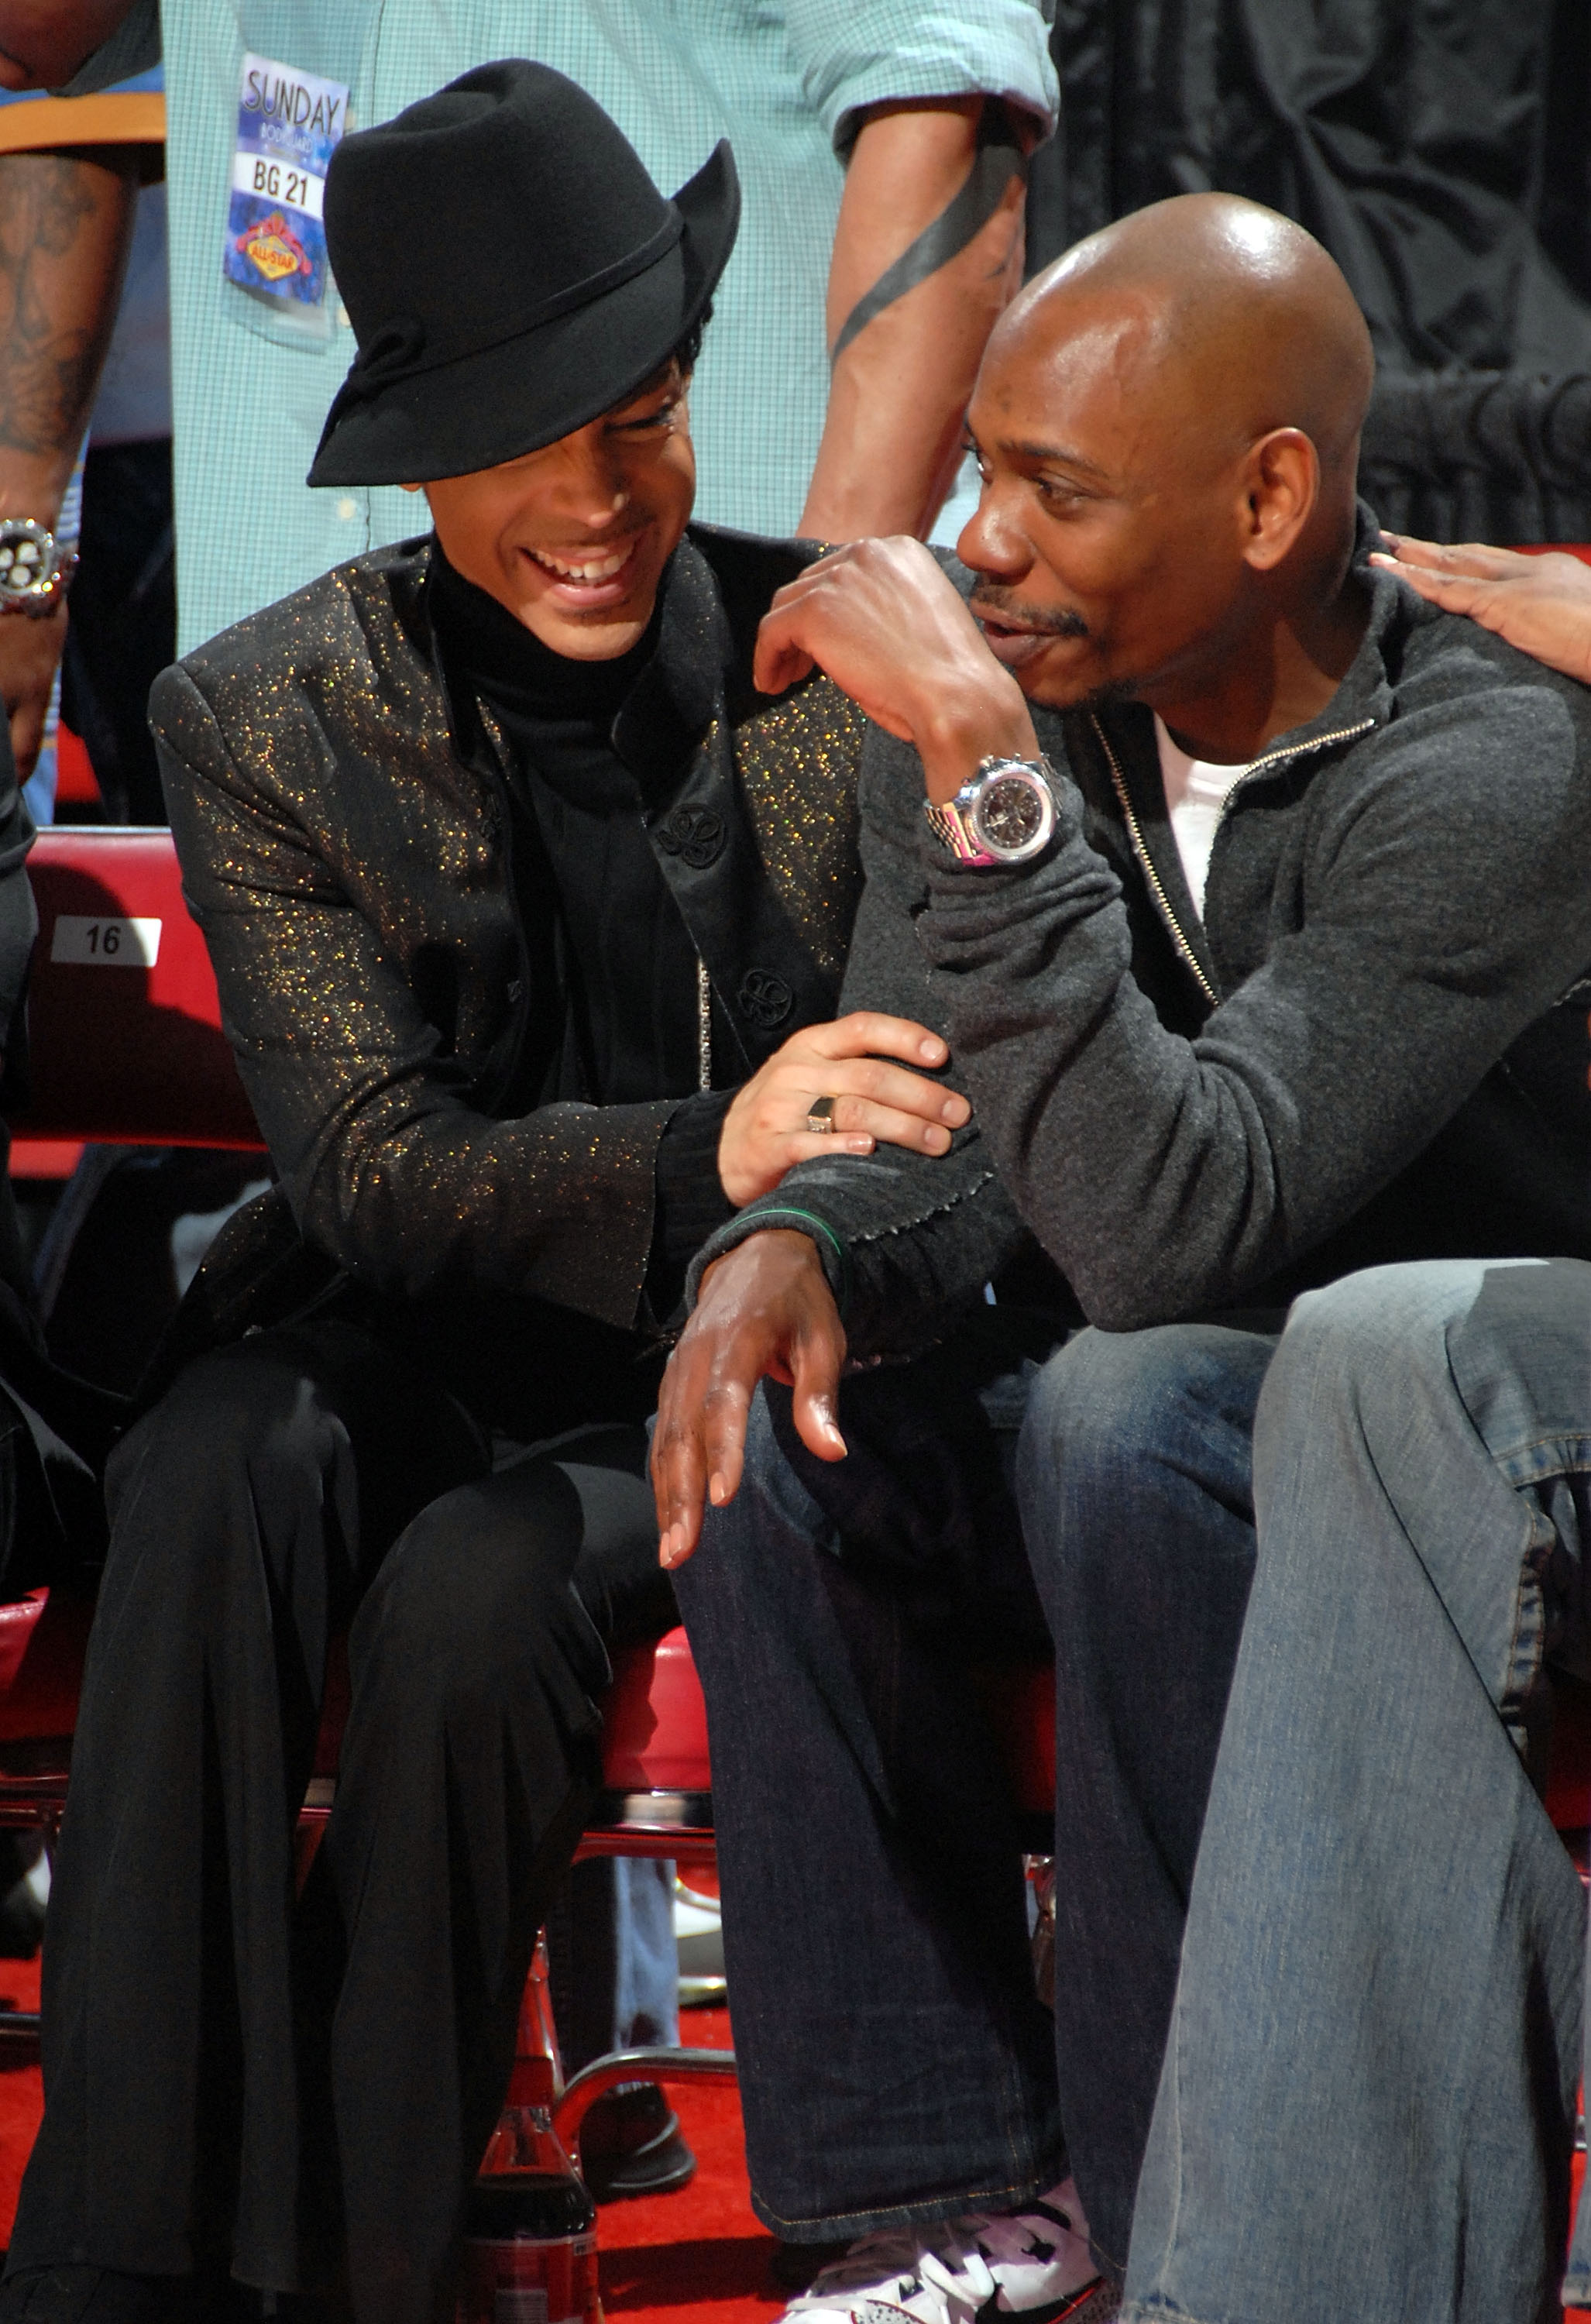 Prince with comedian Dave Chappelle at the 2007 NBA All-Star Game on Feb. 18, 2007 in Las Vegas.